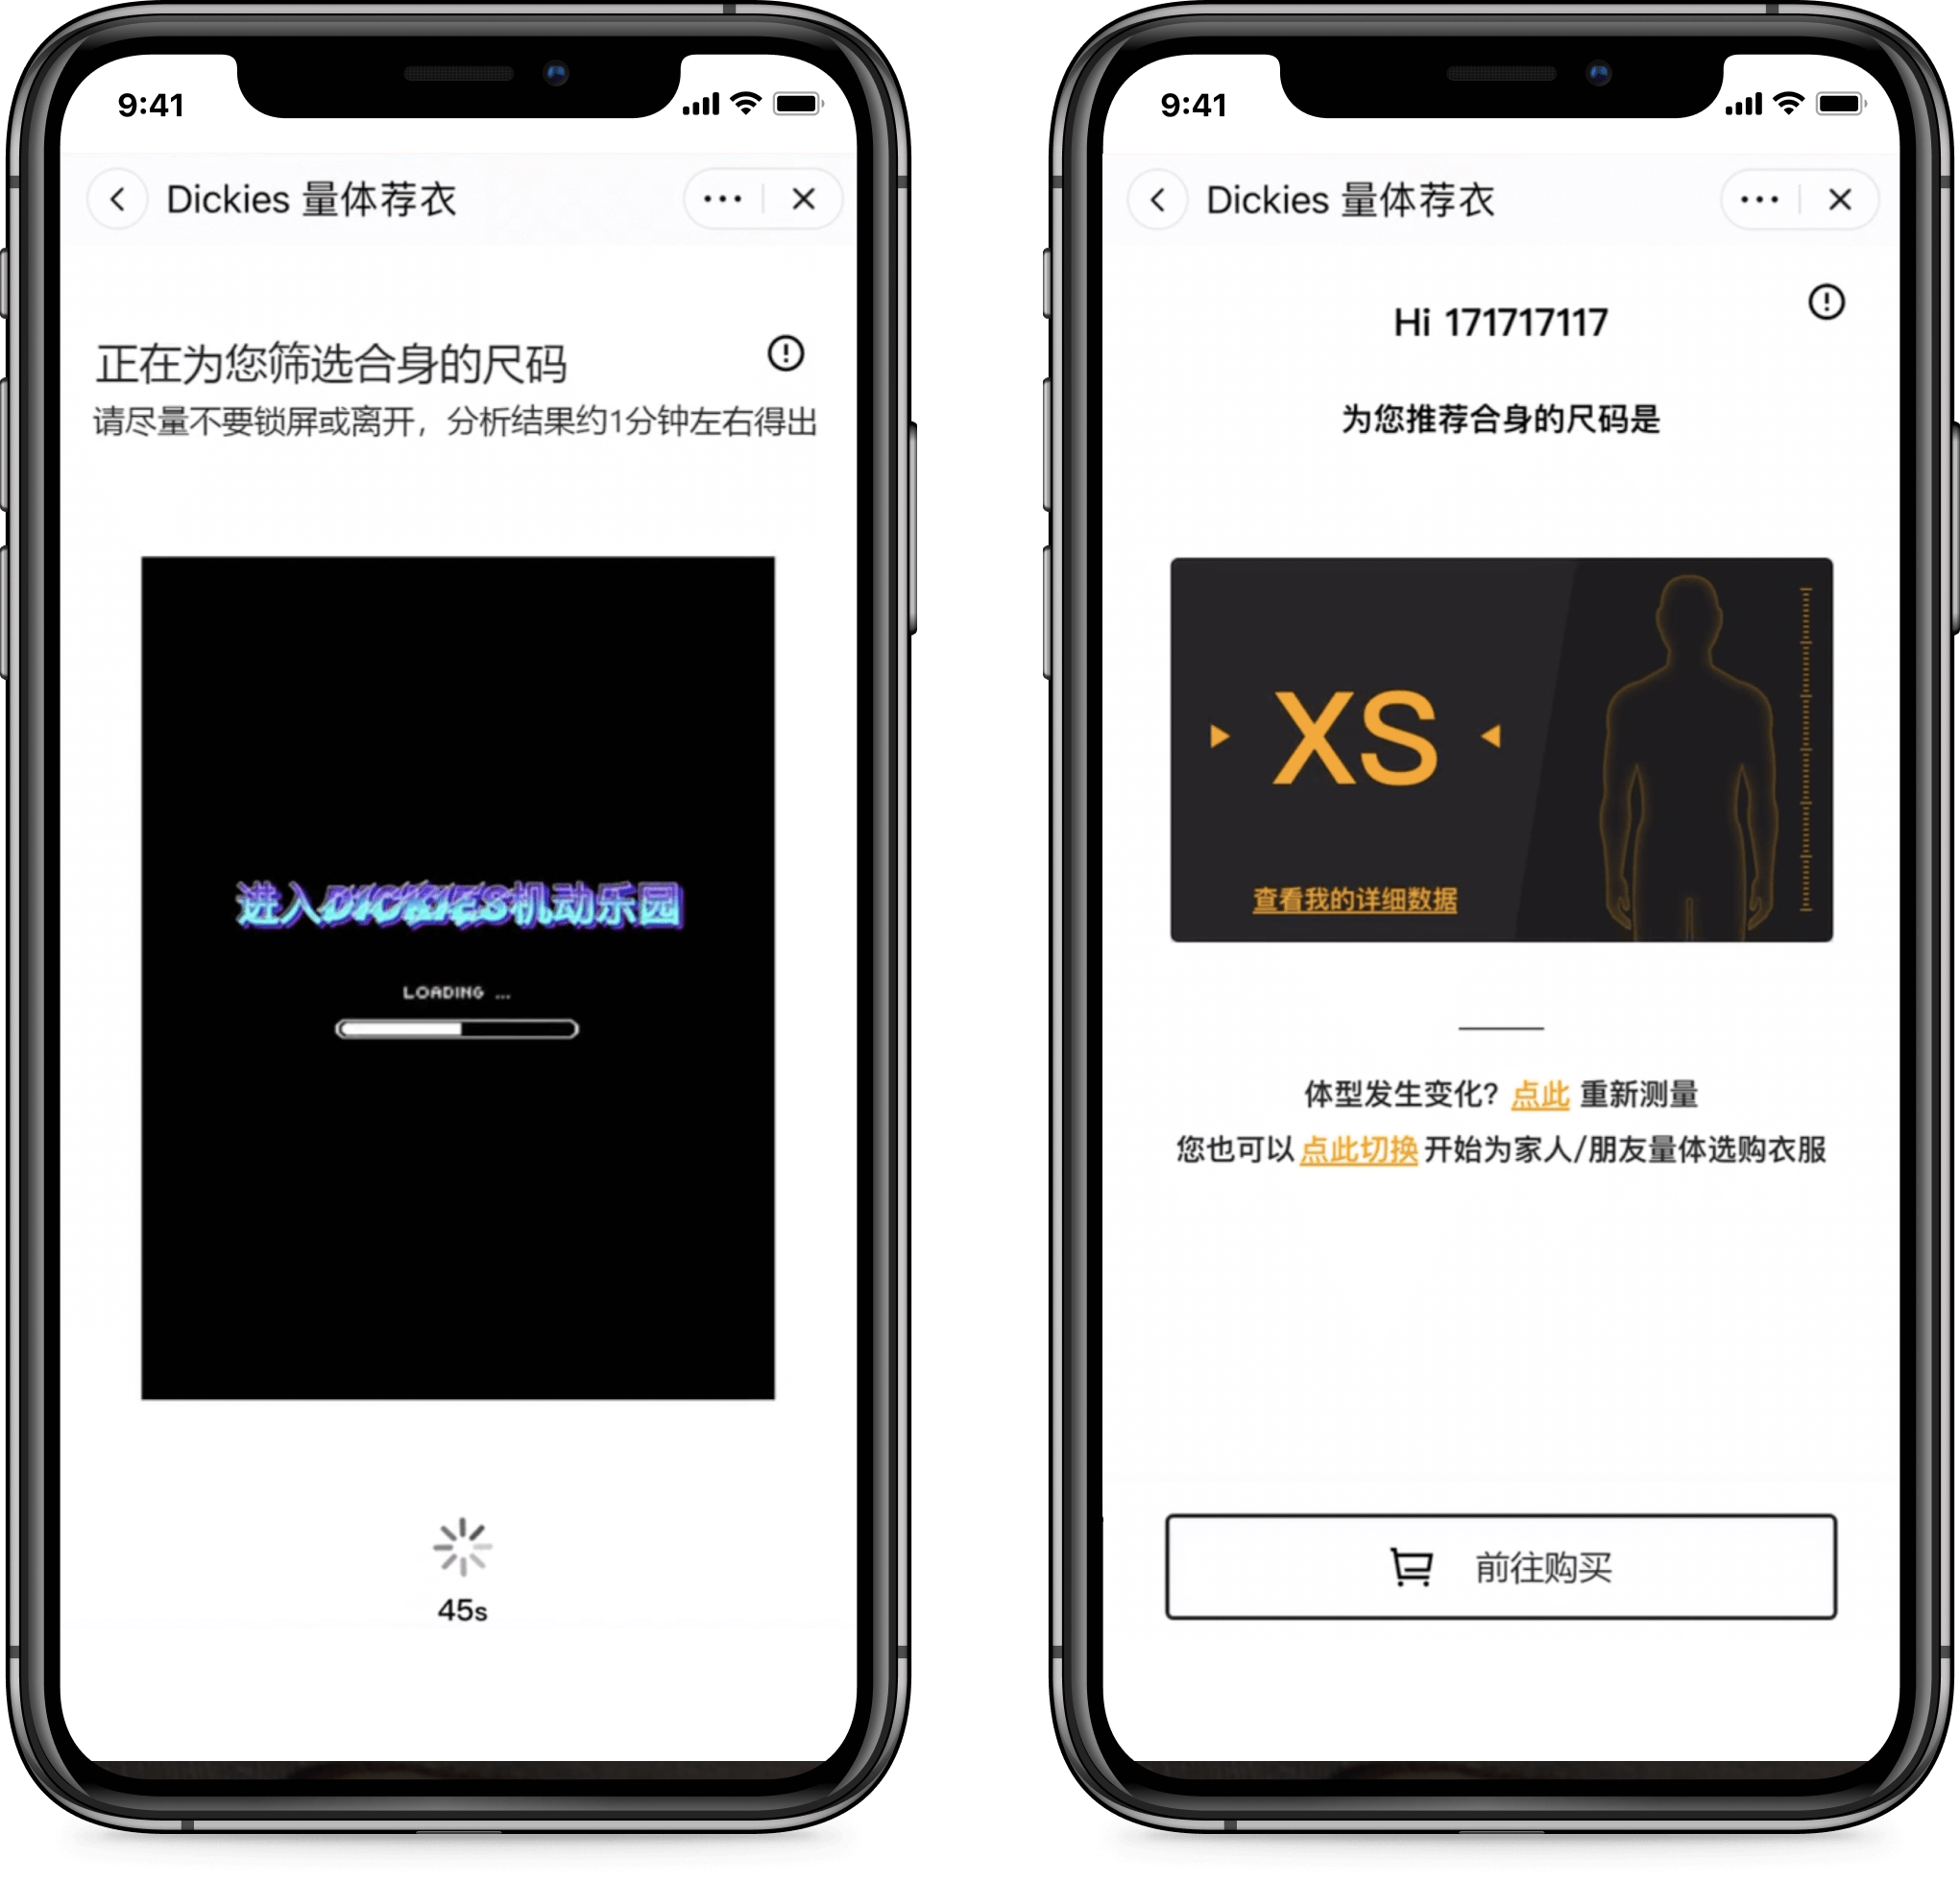 Two smartphone screens display a 3DLOOK size recommendation app. The left screen shows a loading animation, while the right screen suggests an XS size with options to proceed or return. The app offers a personalized fitting experience for Dickies® apparel.